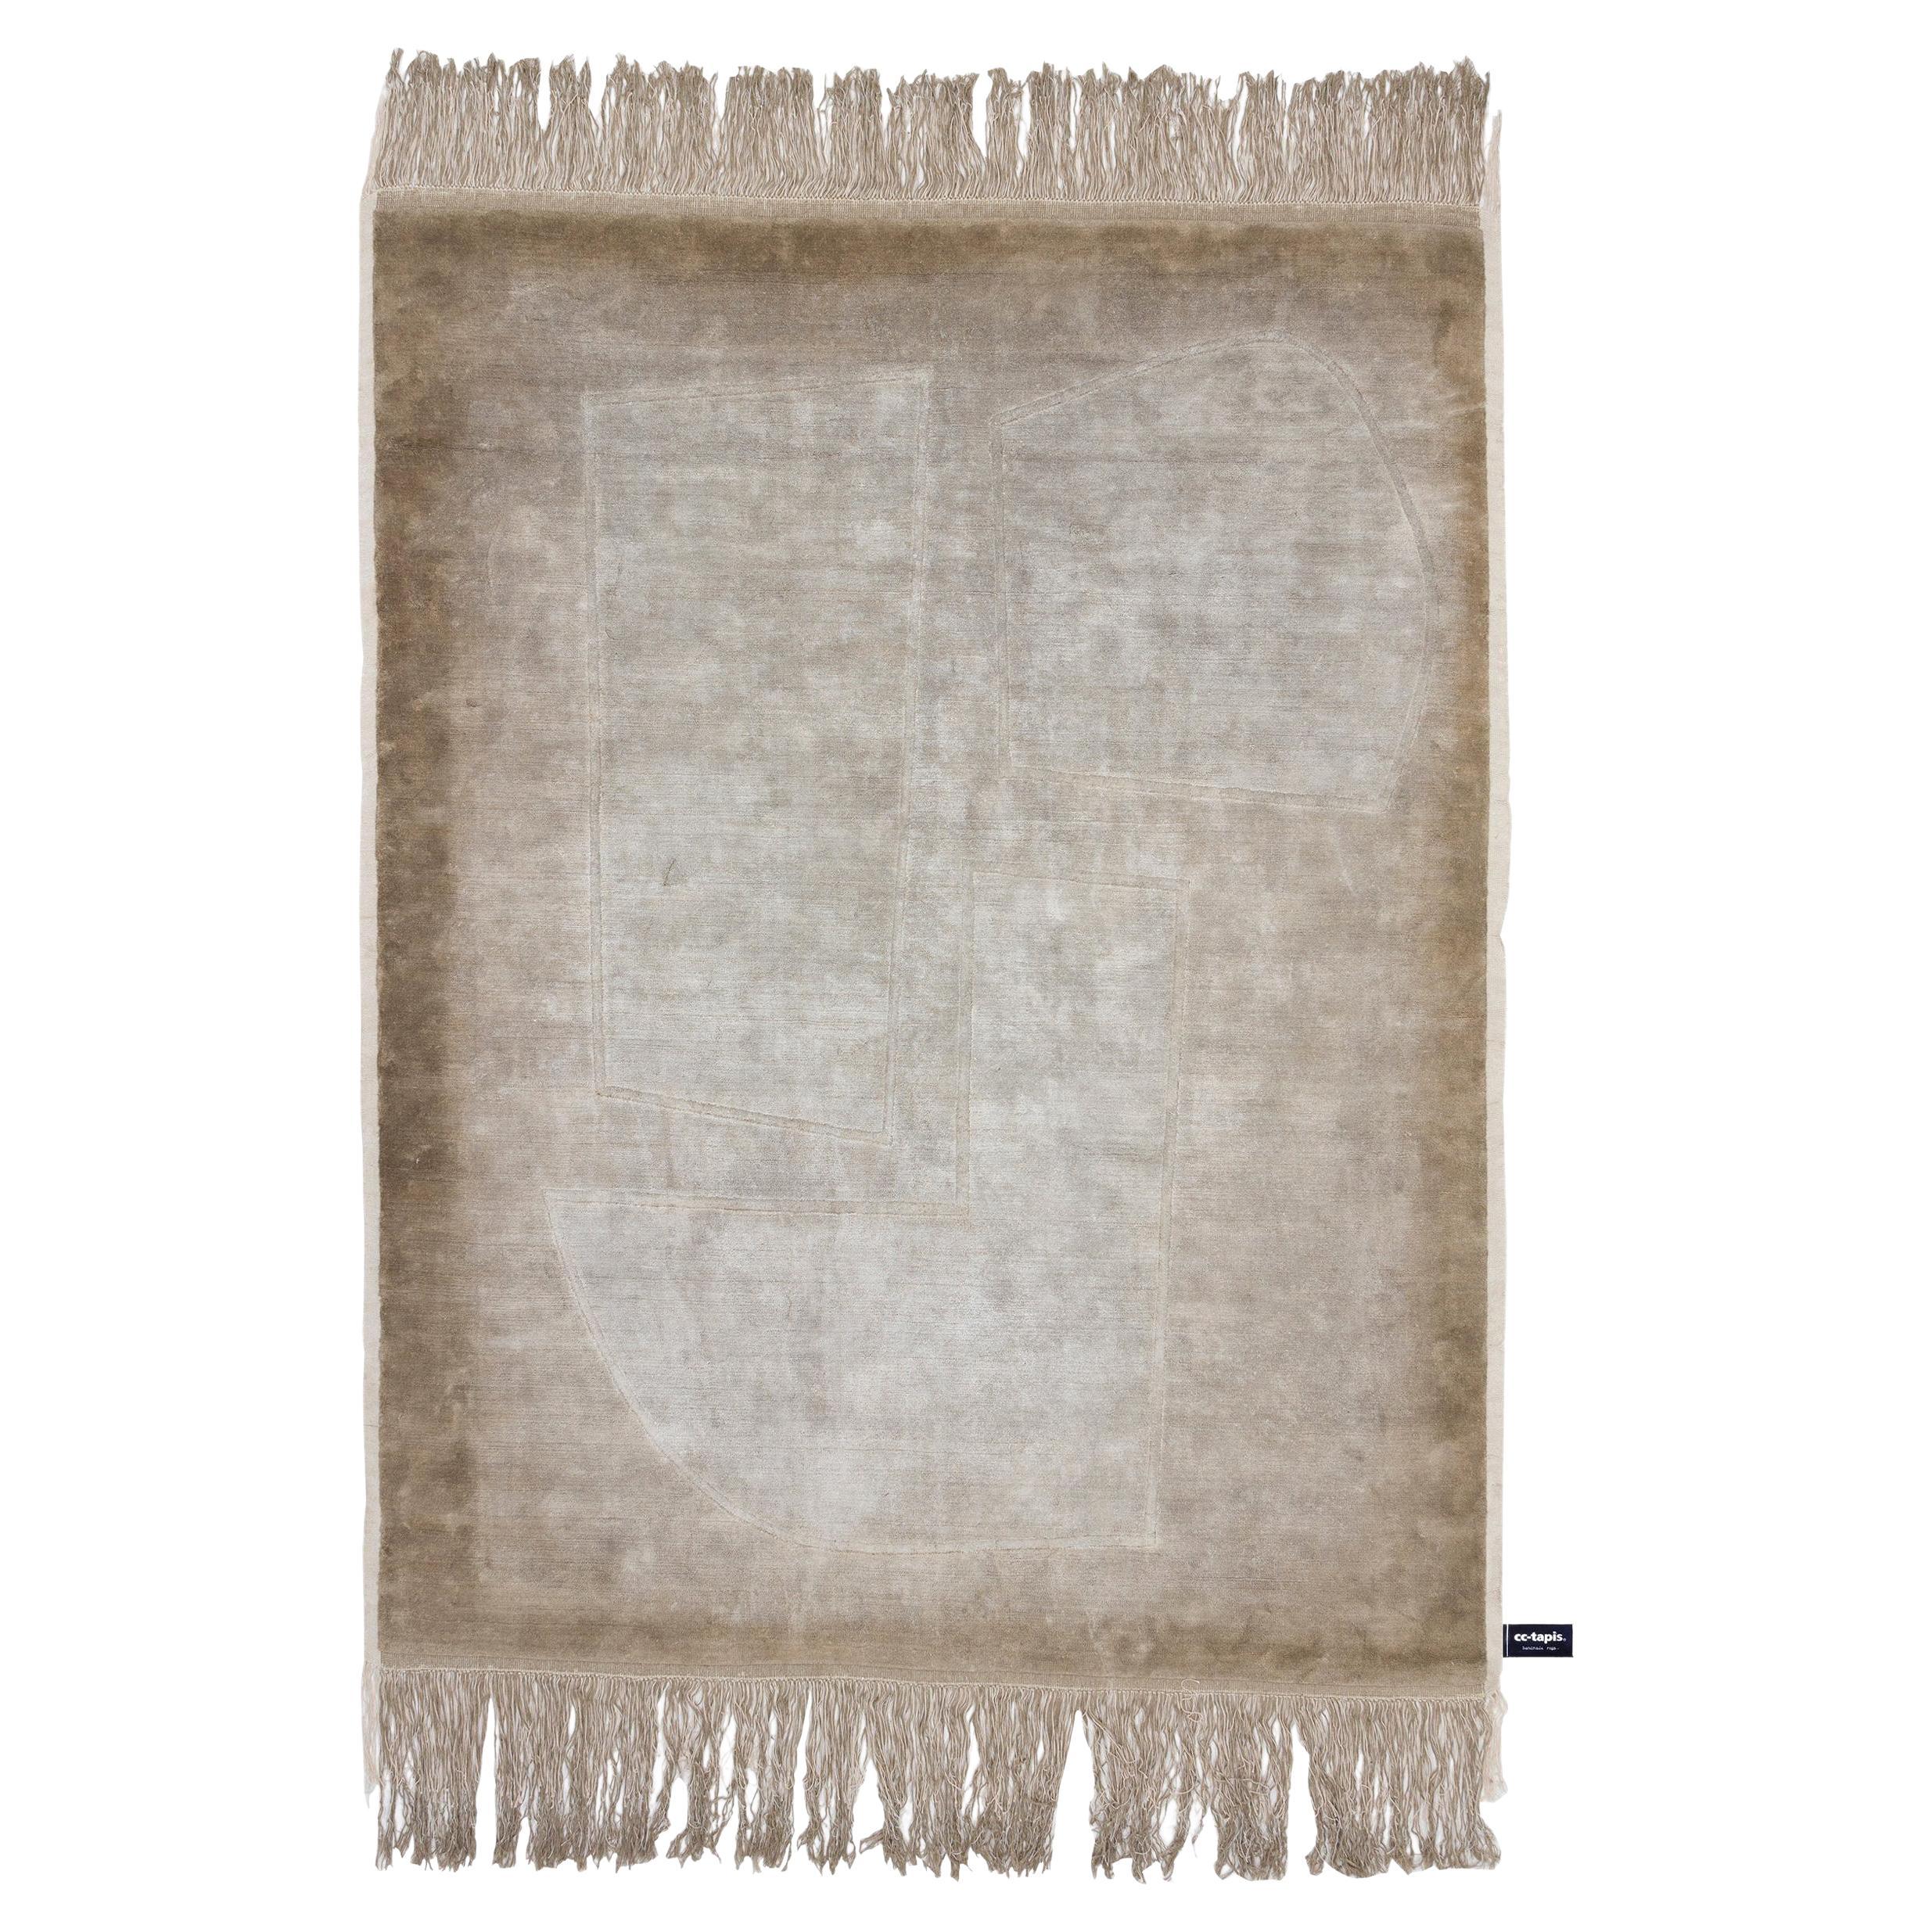 cc-tapis Tapis d'inventaire Raw by Faye Toogood - EN STOCK